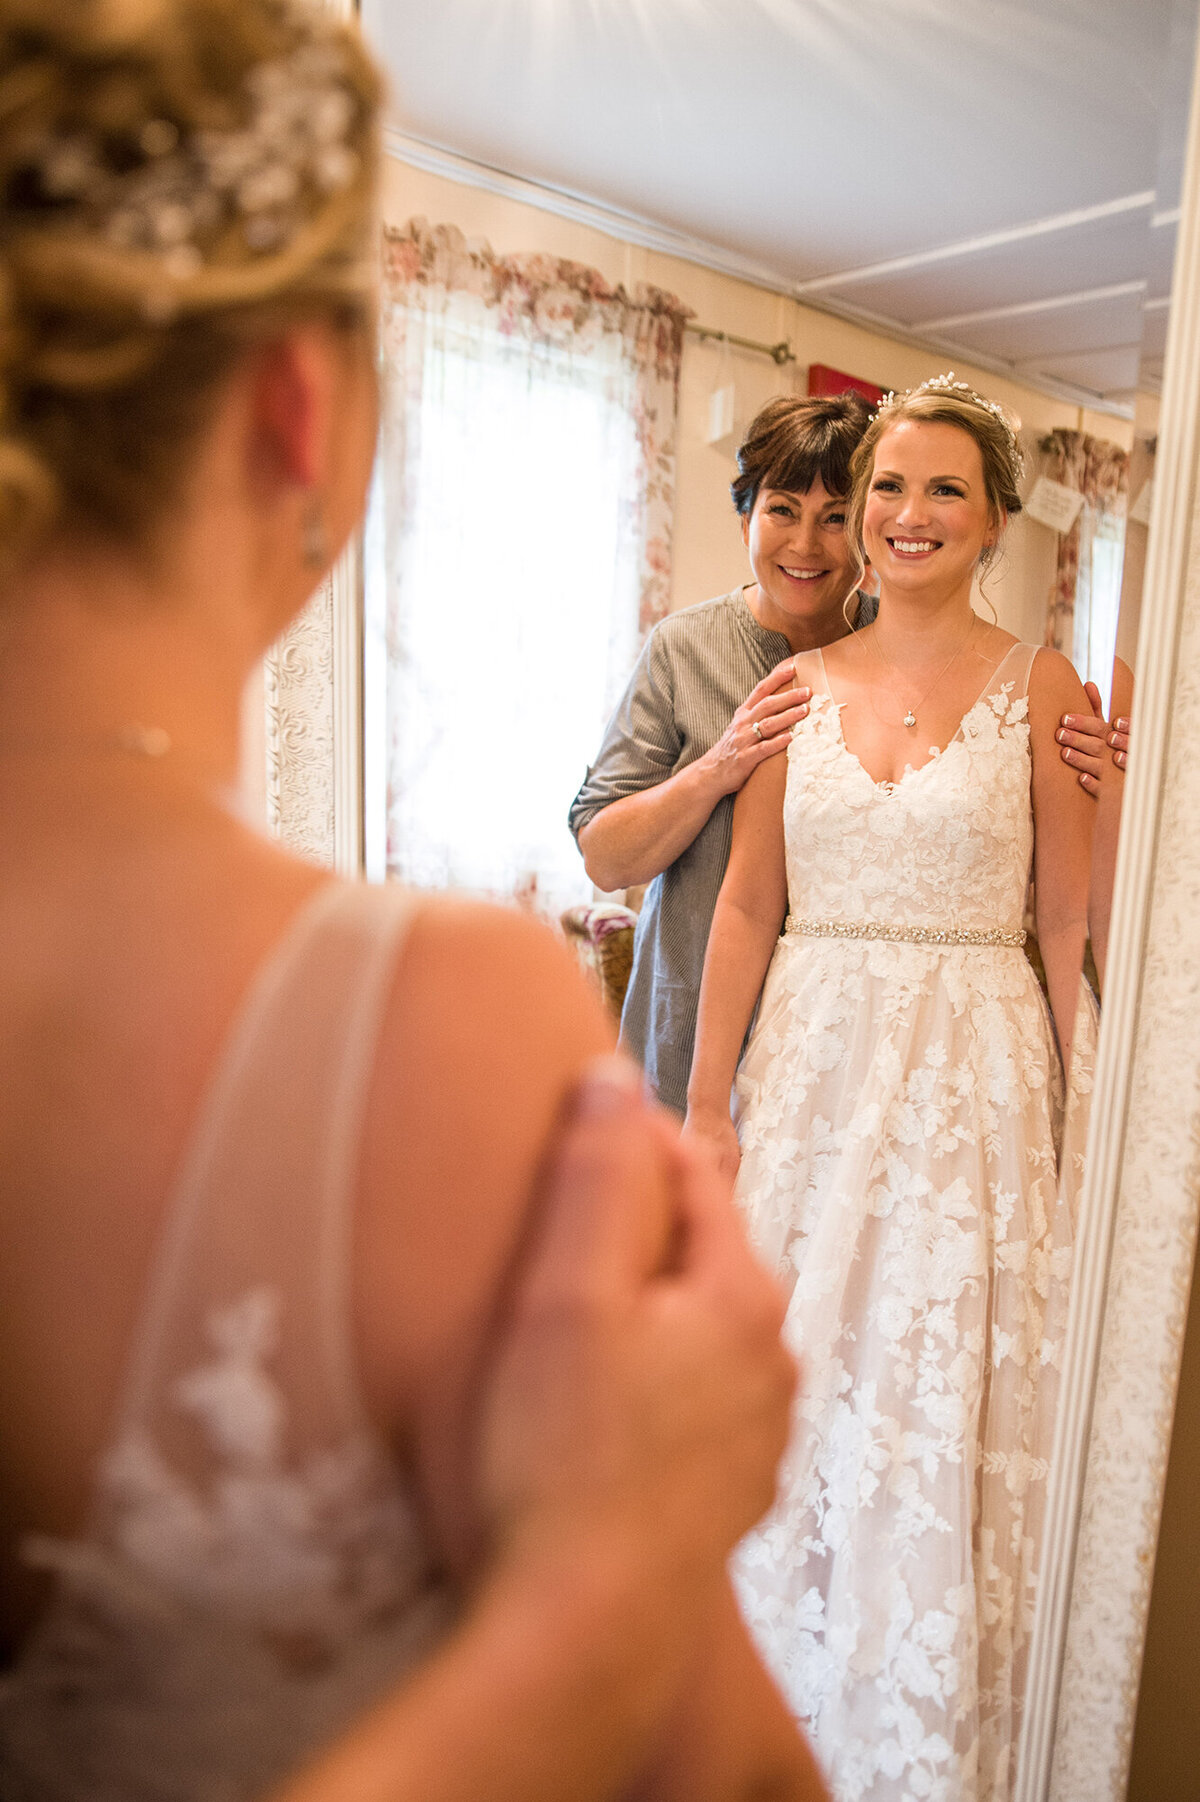 Mom hugs bride in the mirror after she puts on her wedding dress.